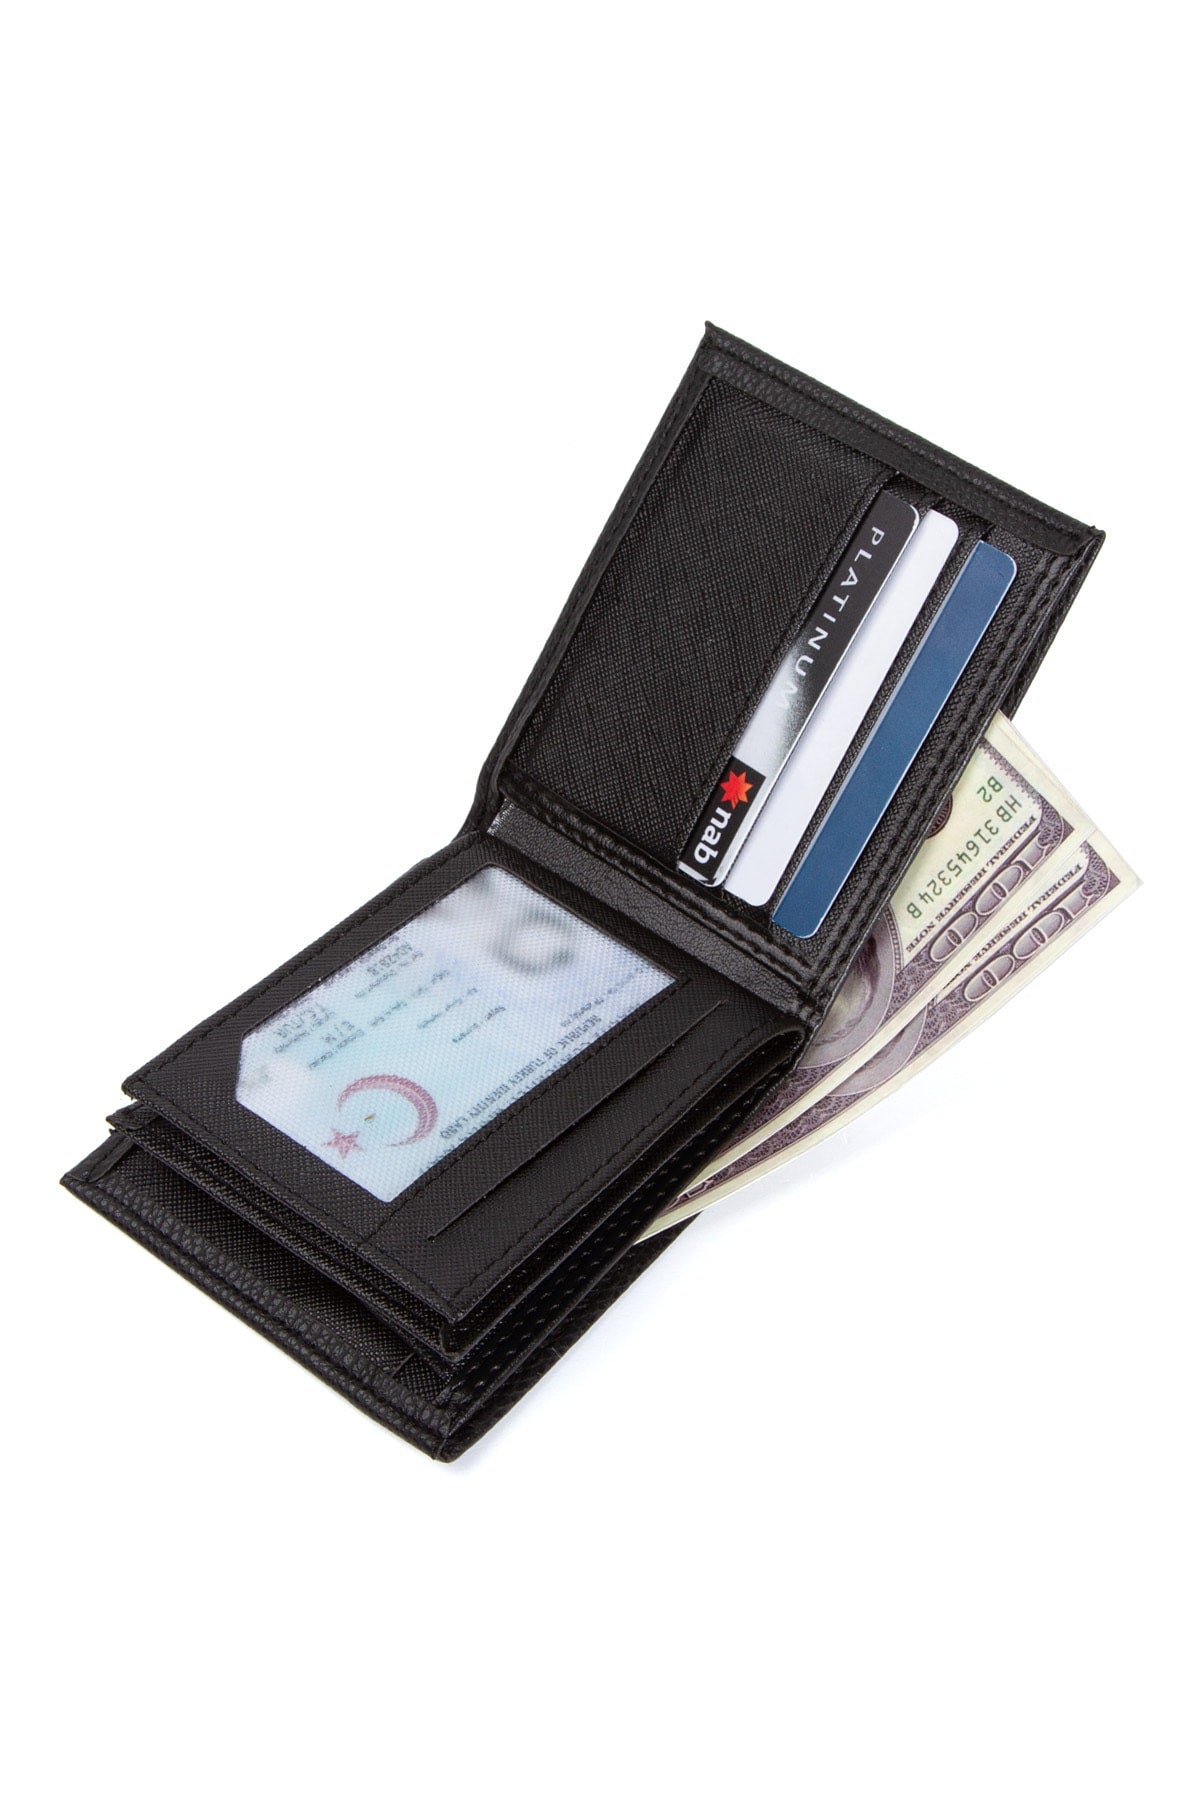 Black Color Wallet Men's Wallet With Coin Holder Card Compartment